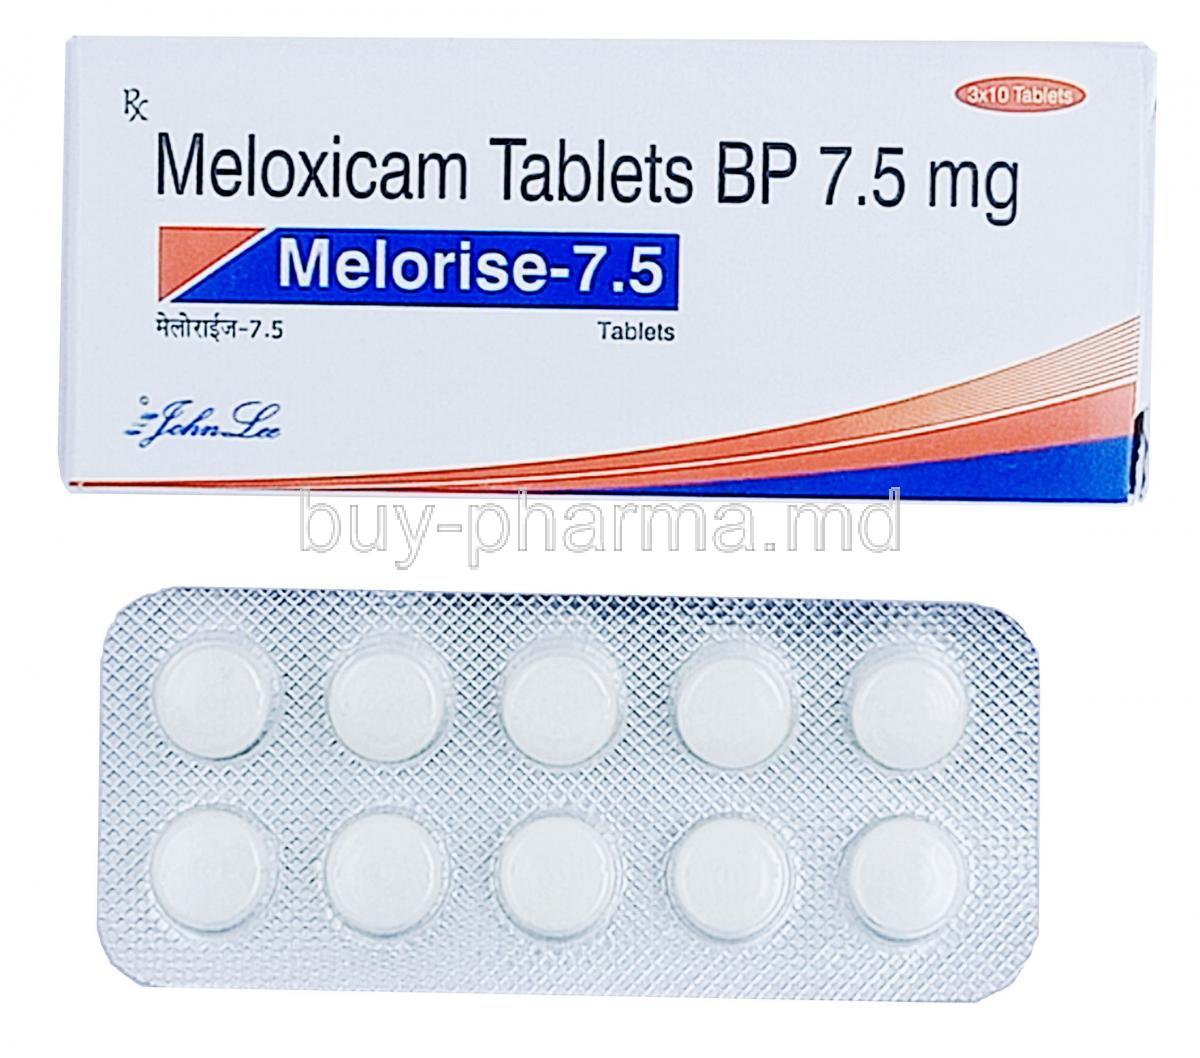 Melorise-7.5, Meloxicam 7.5mg, Johnlee Pharmaceuticals Pvt Ltd, Box and blister pack front presentation